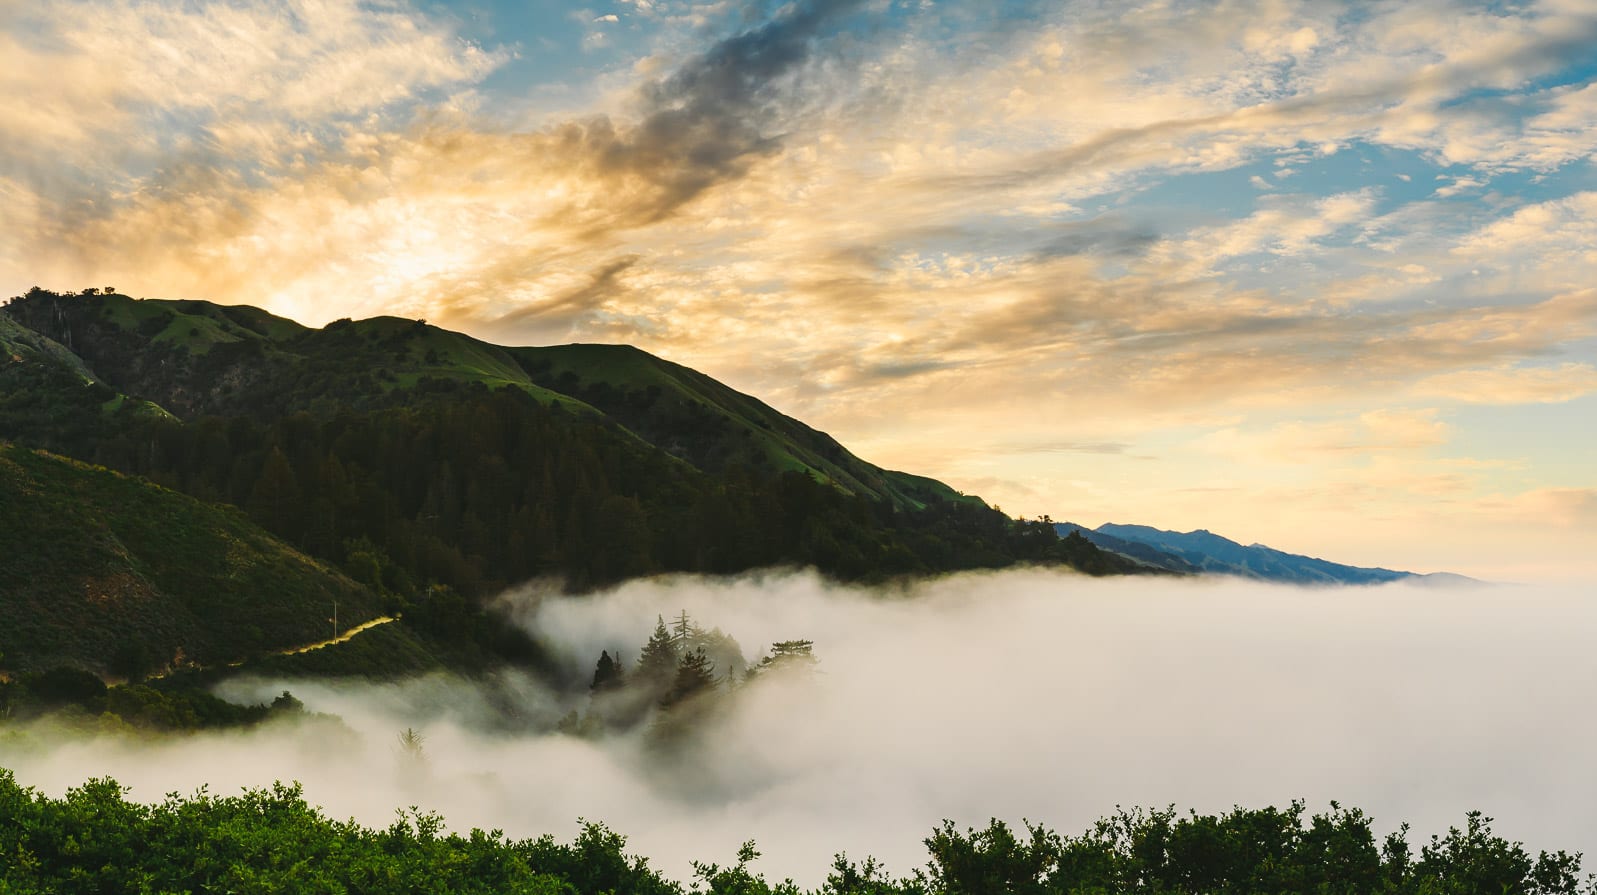 Landscapes of mountains and the sunset with fog below in the valley